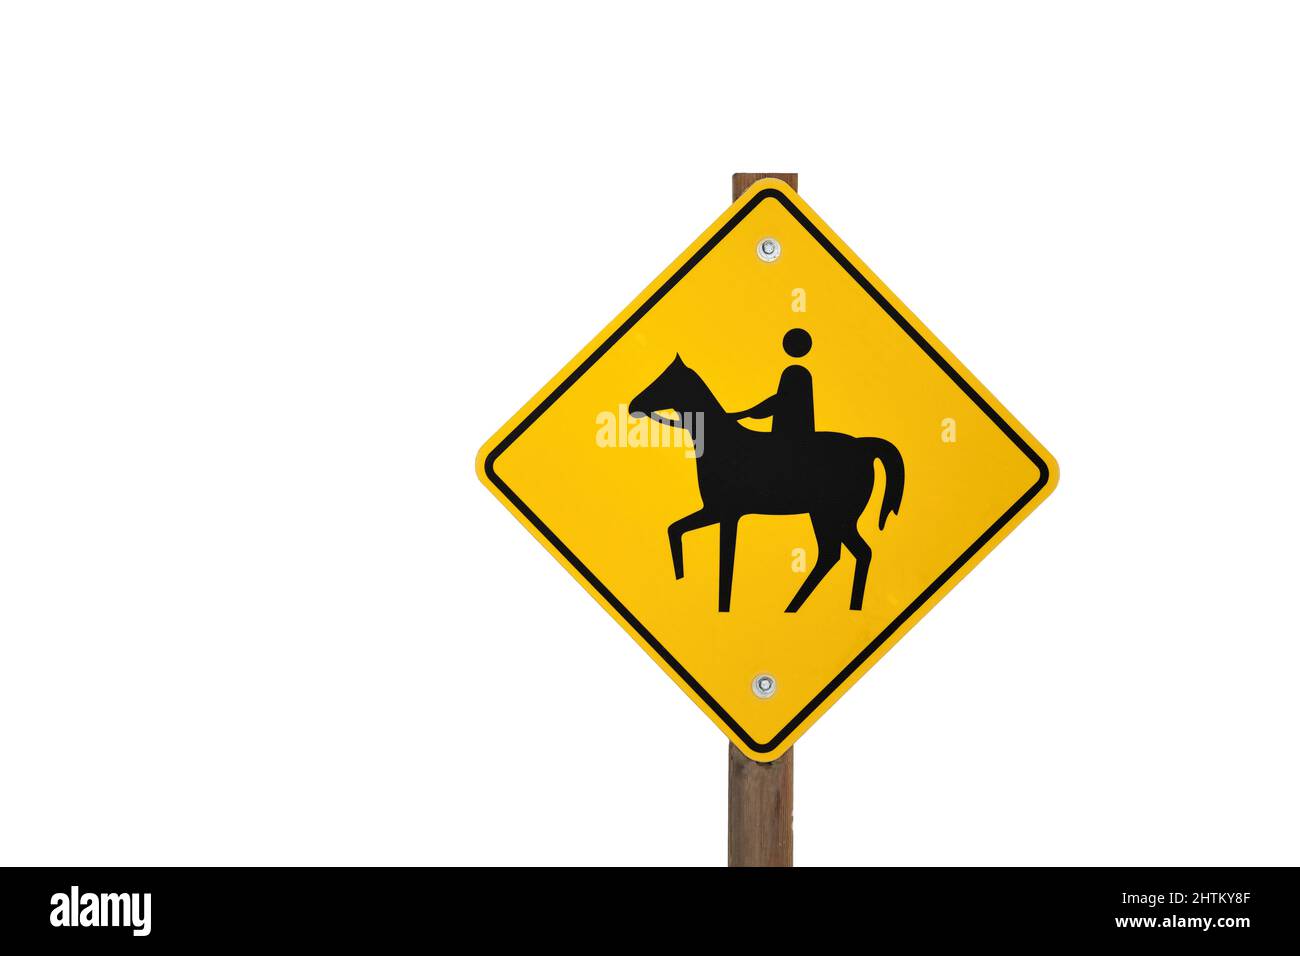 Yellow Caution Horse Rider Riding Sign Isolated Against a White Background Stock Photo